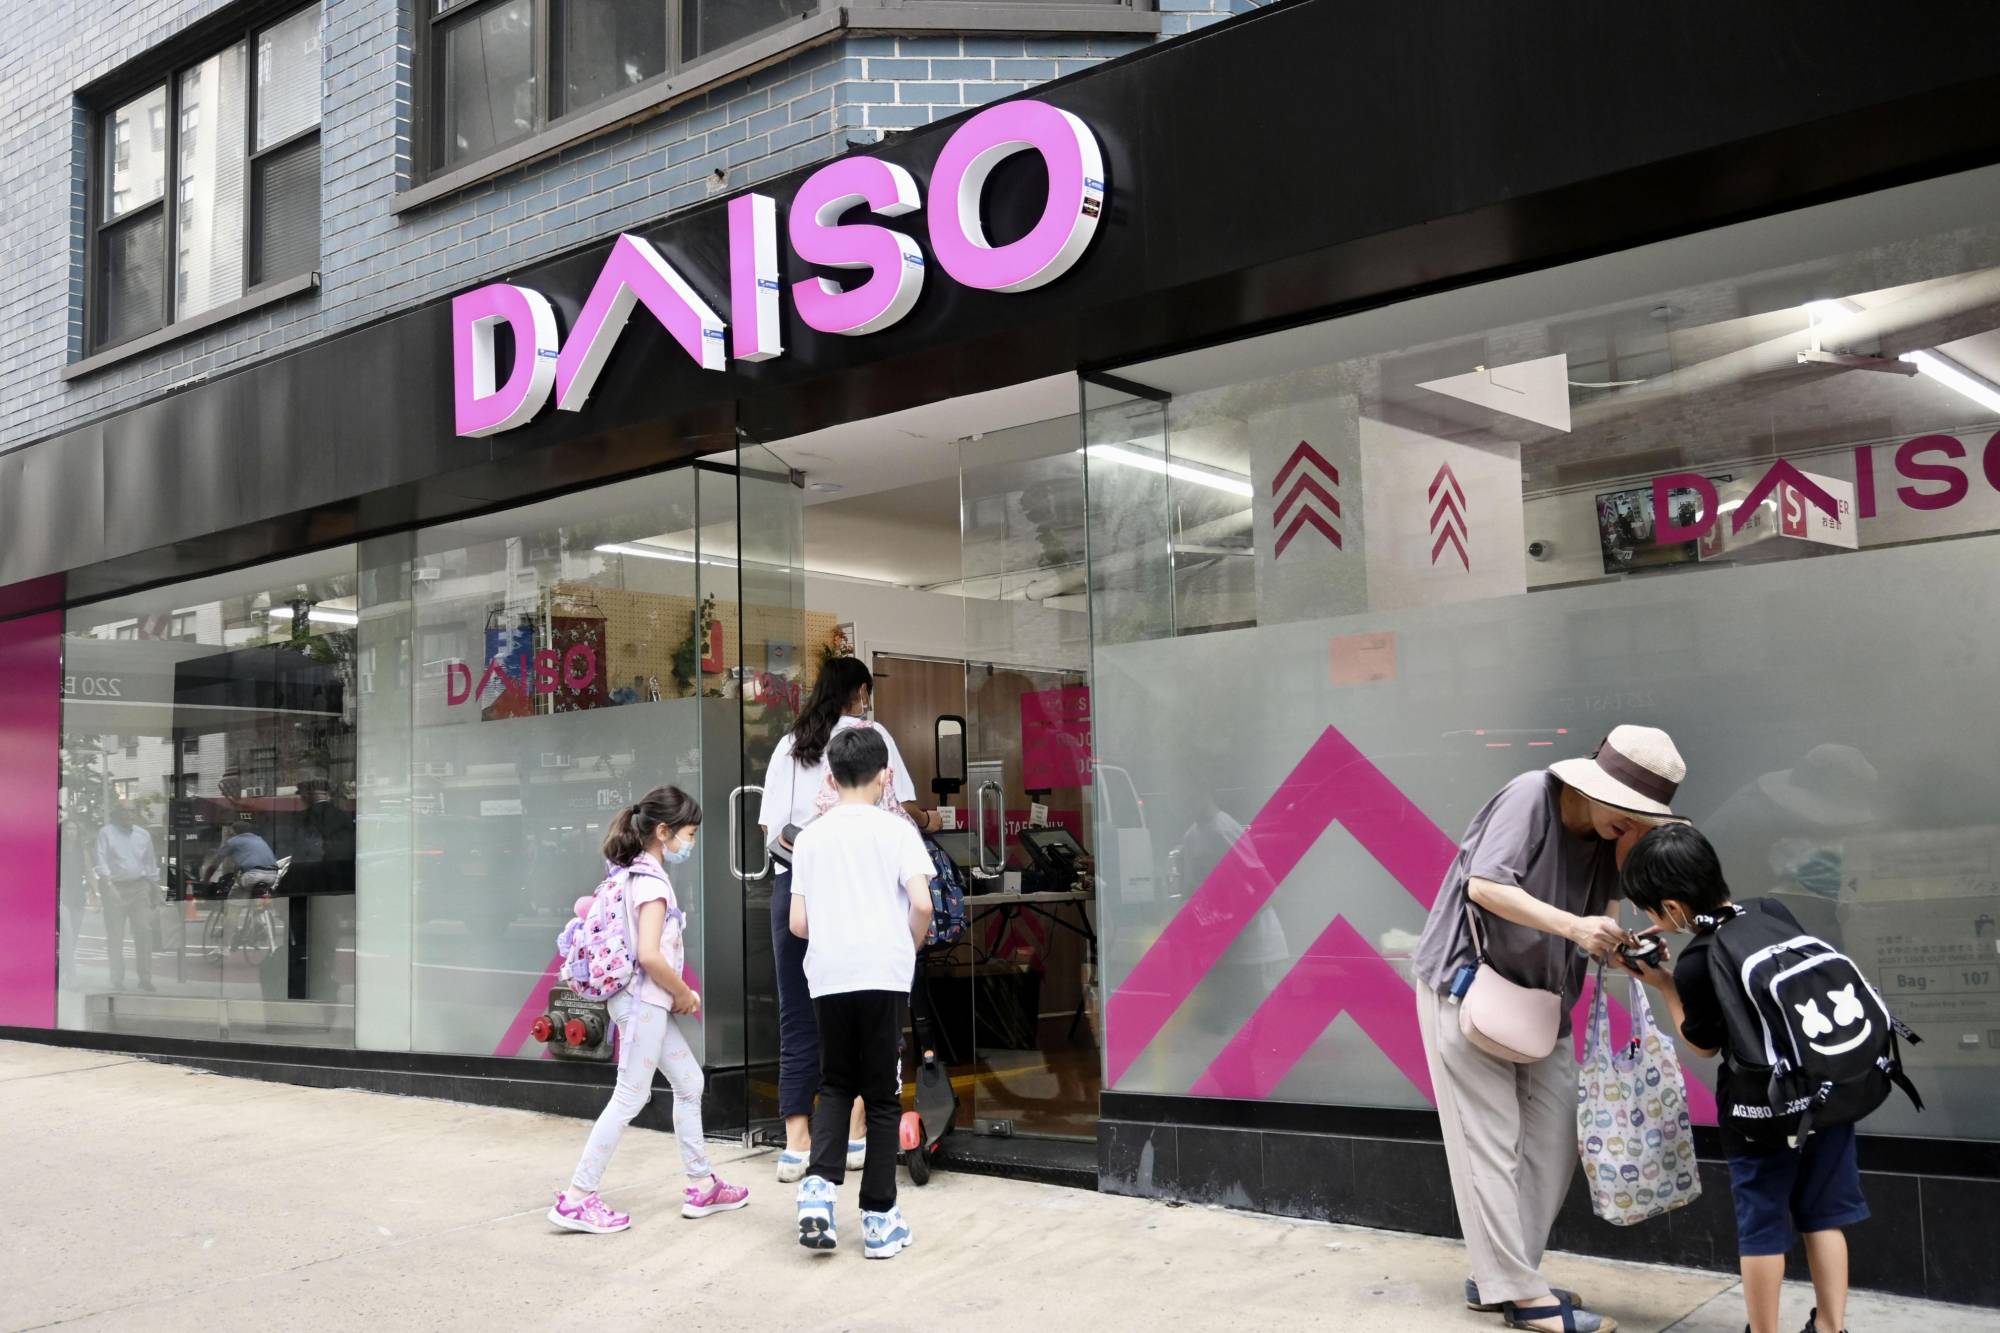 Daiso, Department Store & Value Store